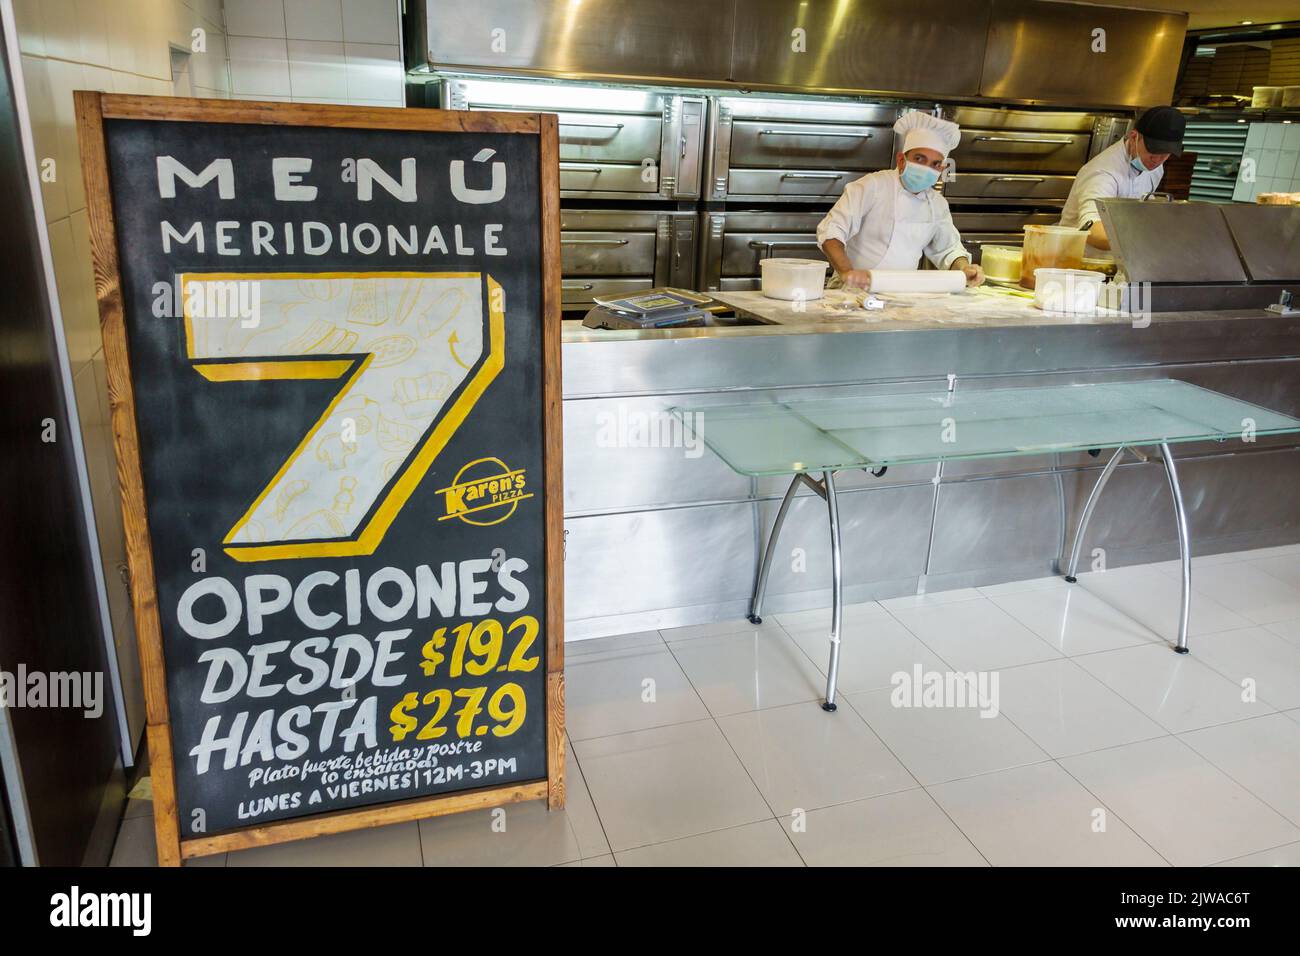 Bogota Colombia,El Chico Calle 94 Karen's Pizza restaurant restaurants dine dining eating out casual cafe cafes bistro bistros food,Colombian Colombia Stock Photo